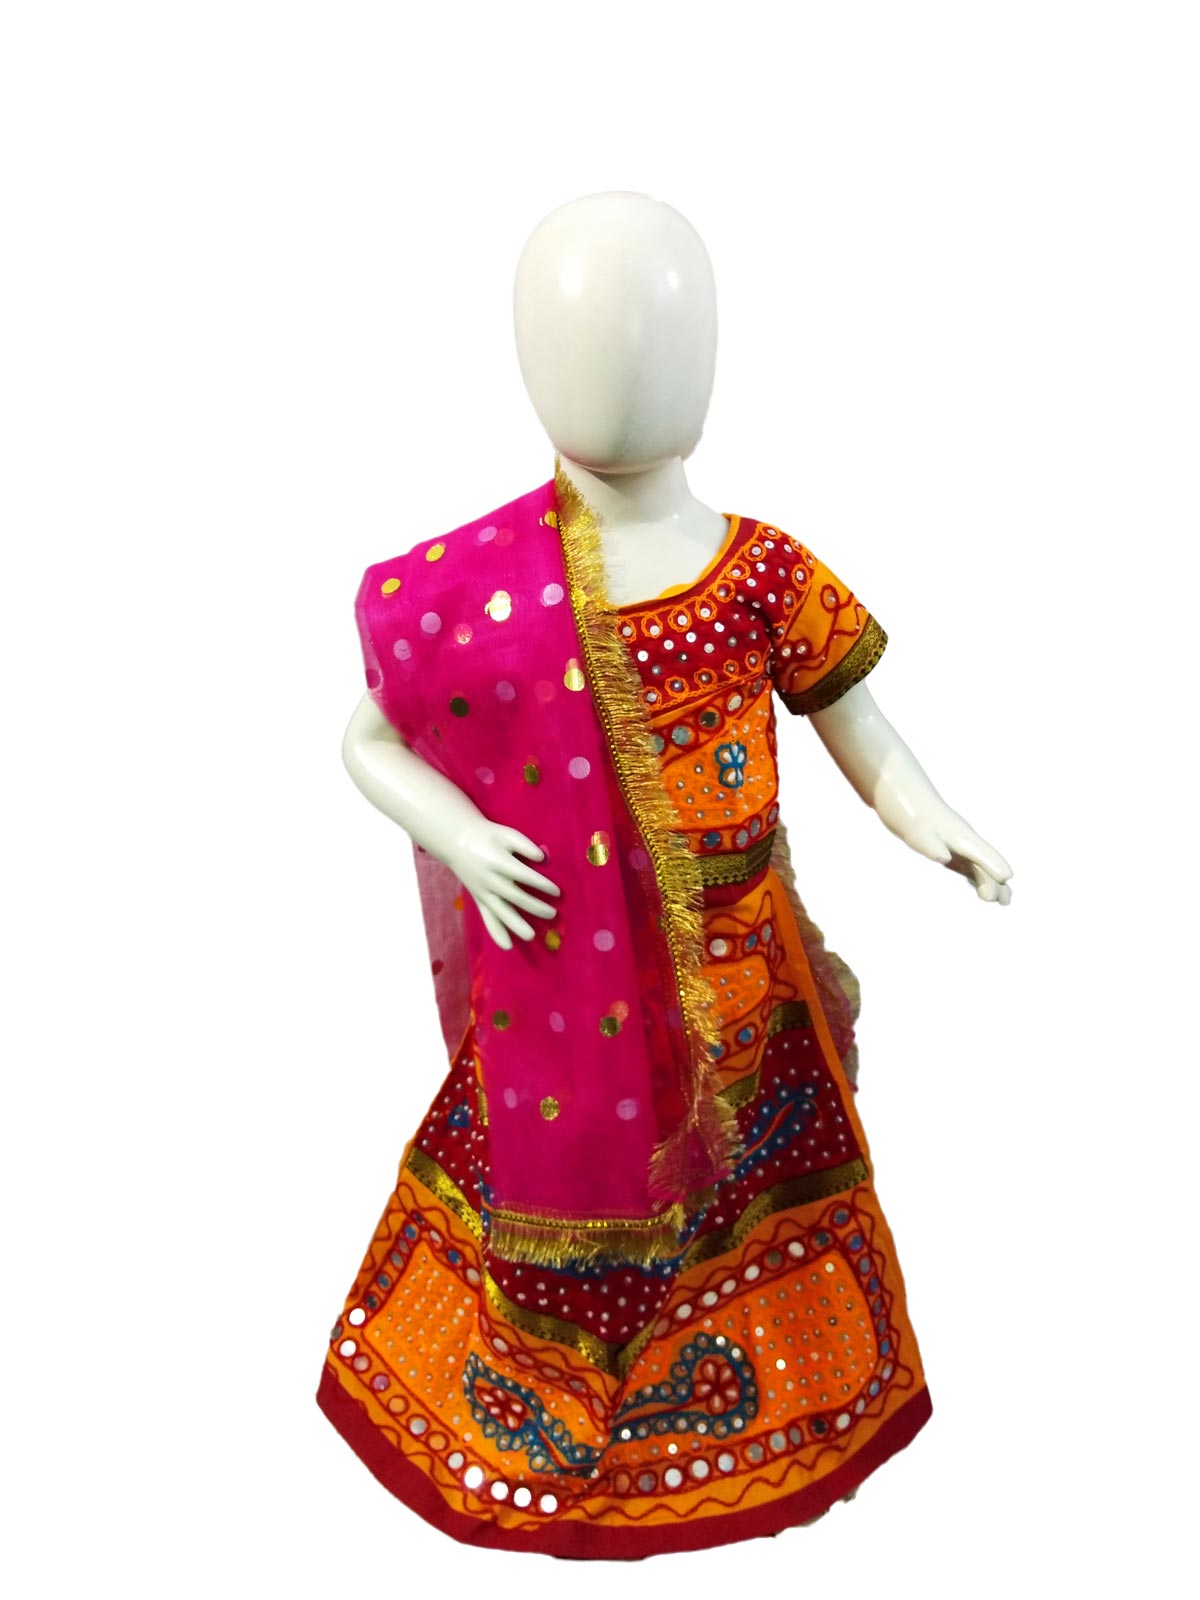 Buy FancyDressWale Gujrati boy Traditional and Garba dress Multicolor (5-6  Years) (Cotton Blend) Online at Low Prices in India - Amazon.in